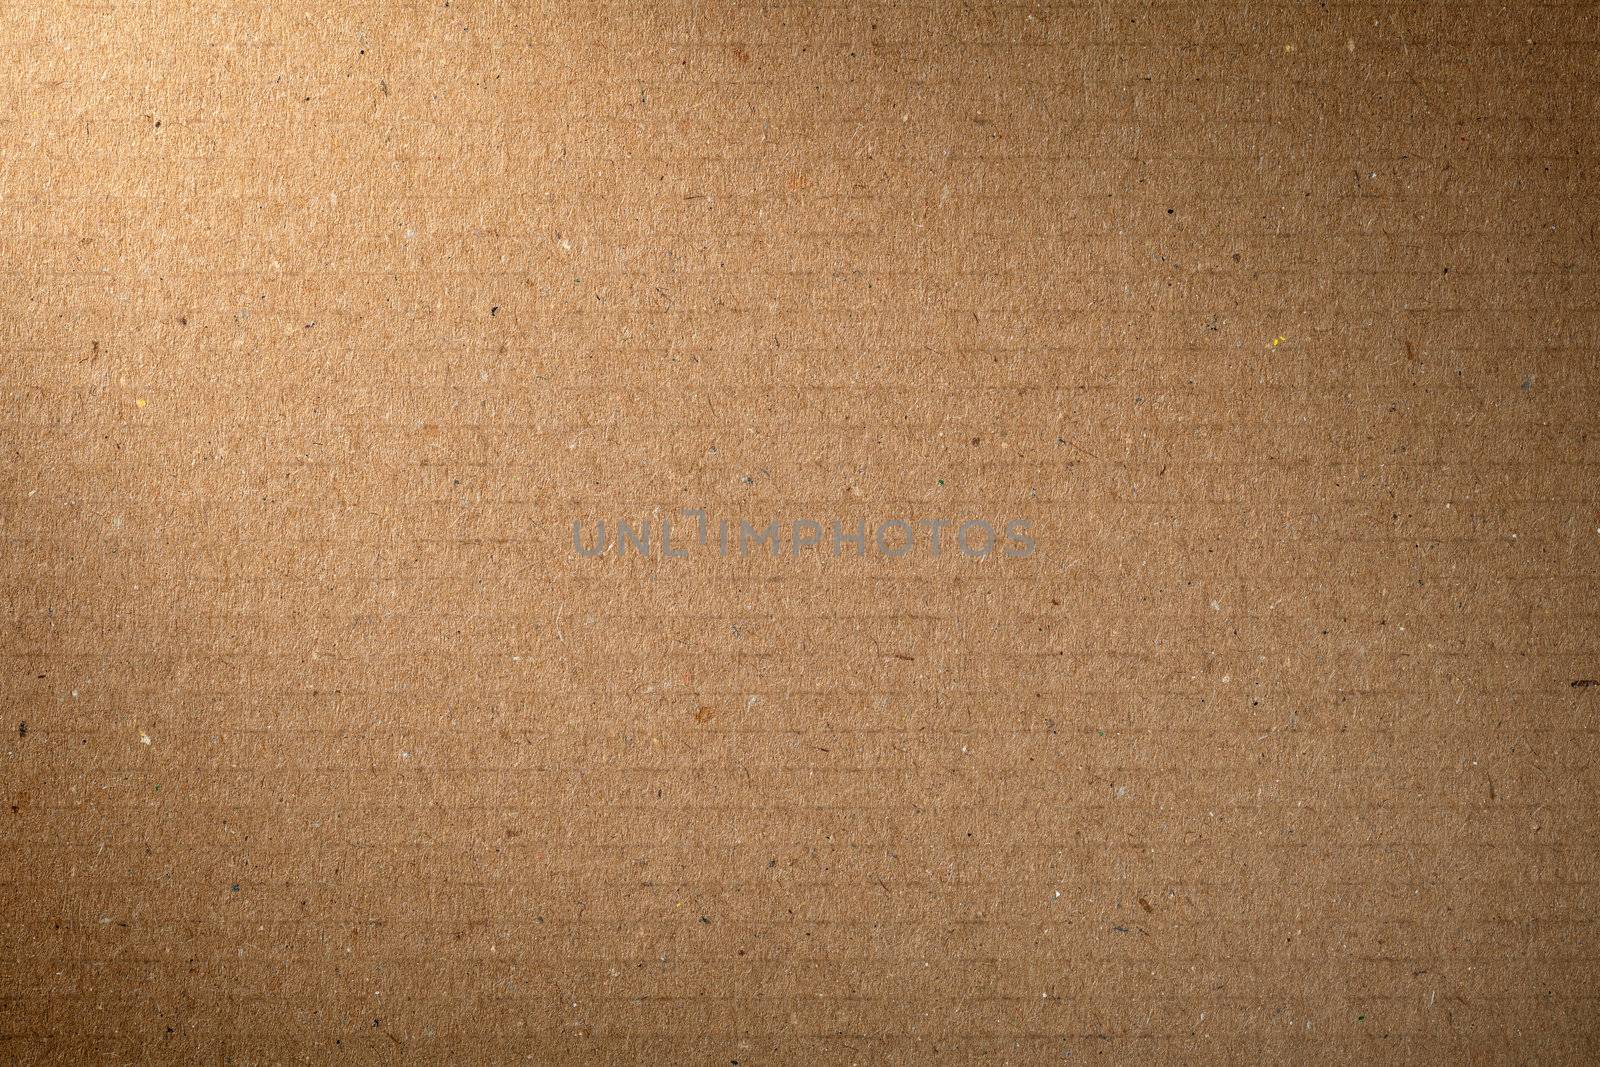 Brown cardboard texture for background, lighting from the left corner